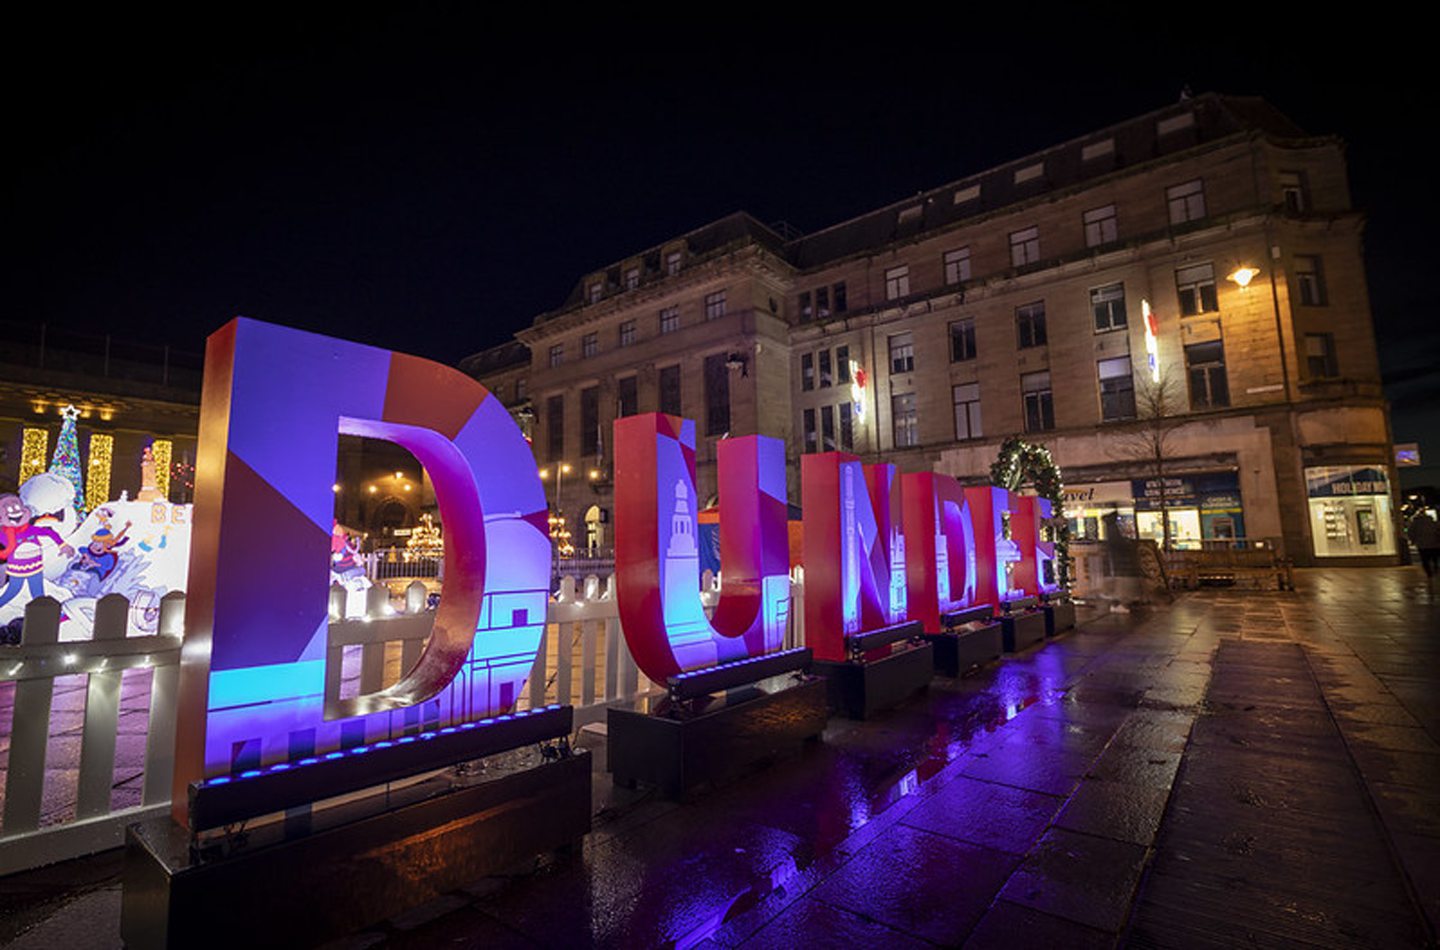 Dundee City Square lit up for Christmas.